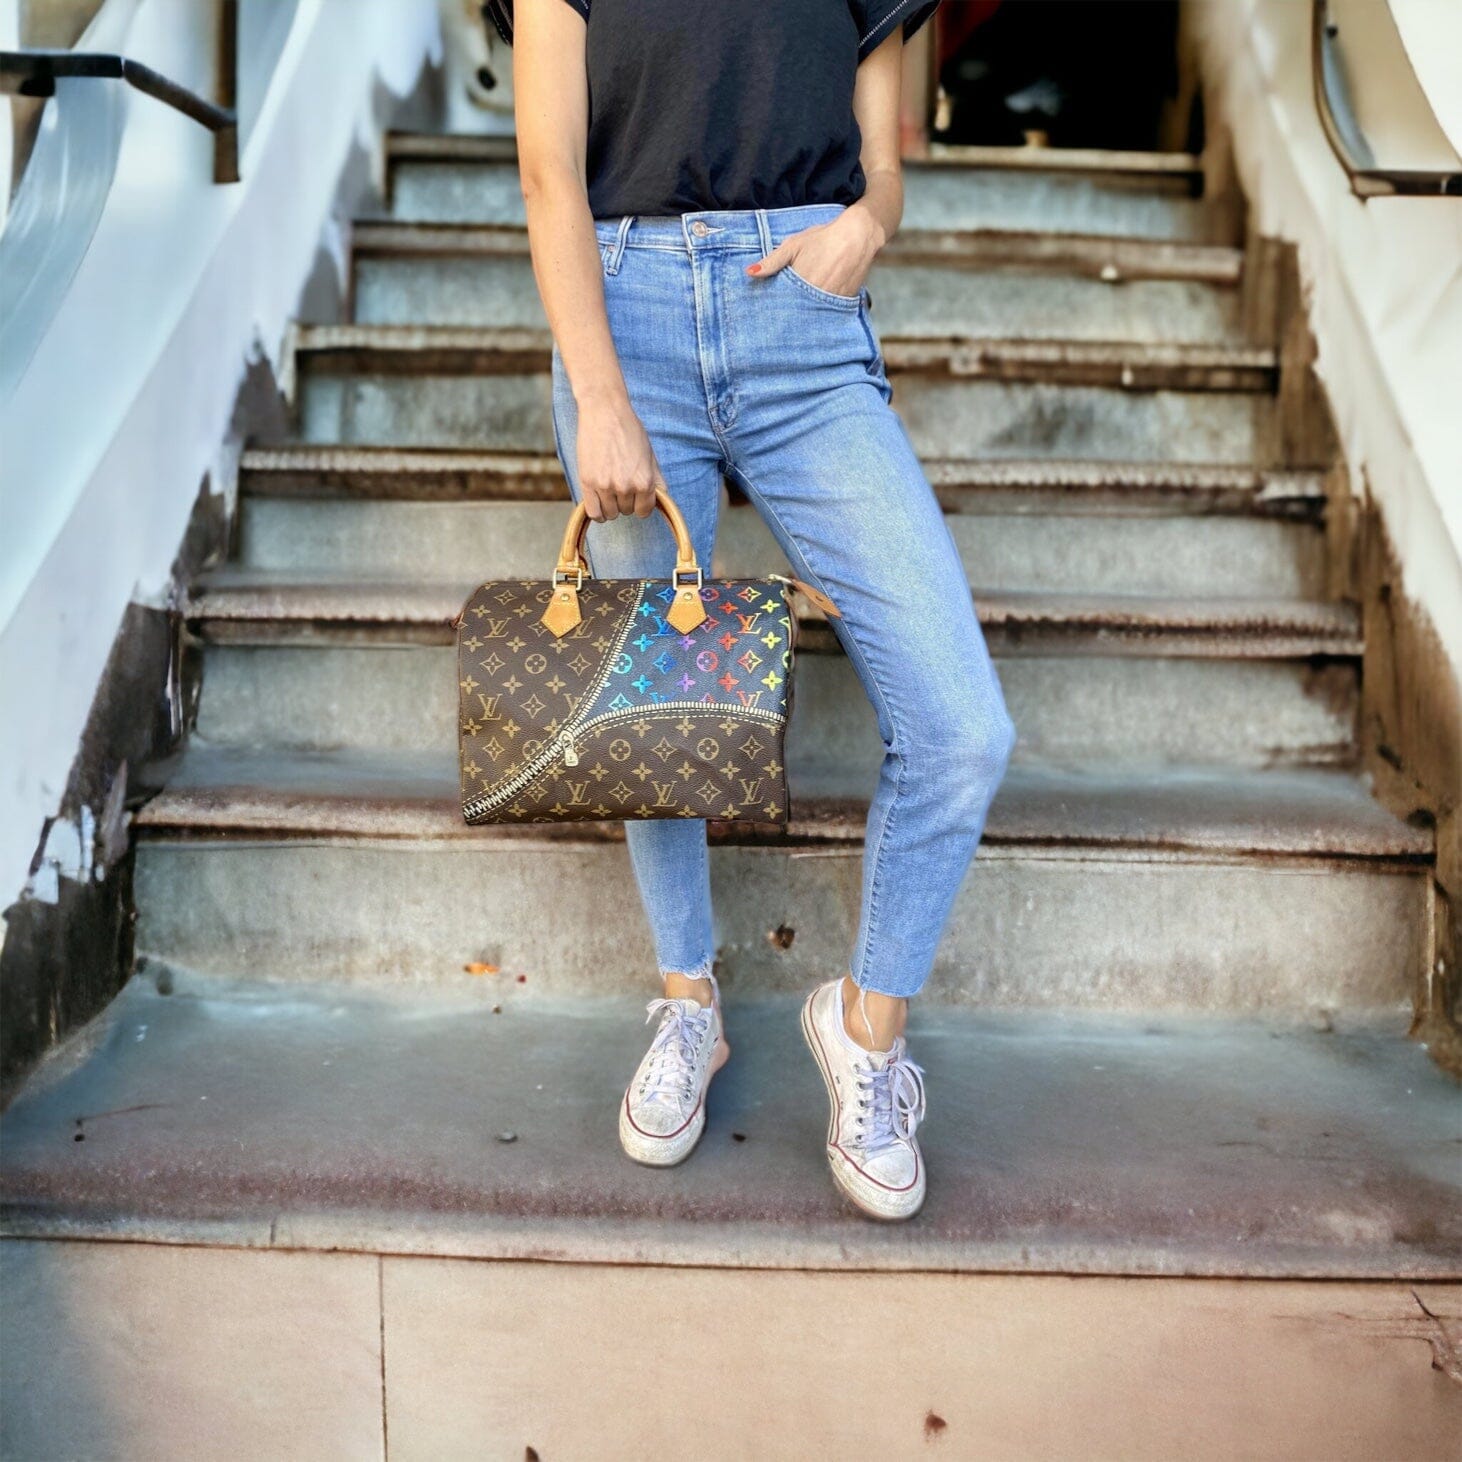 How to dress your Louis Vuitton Speedy 30